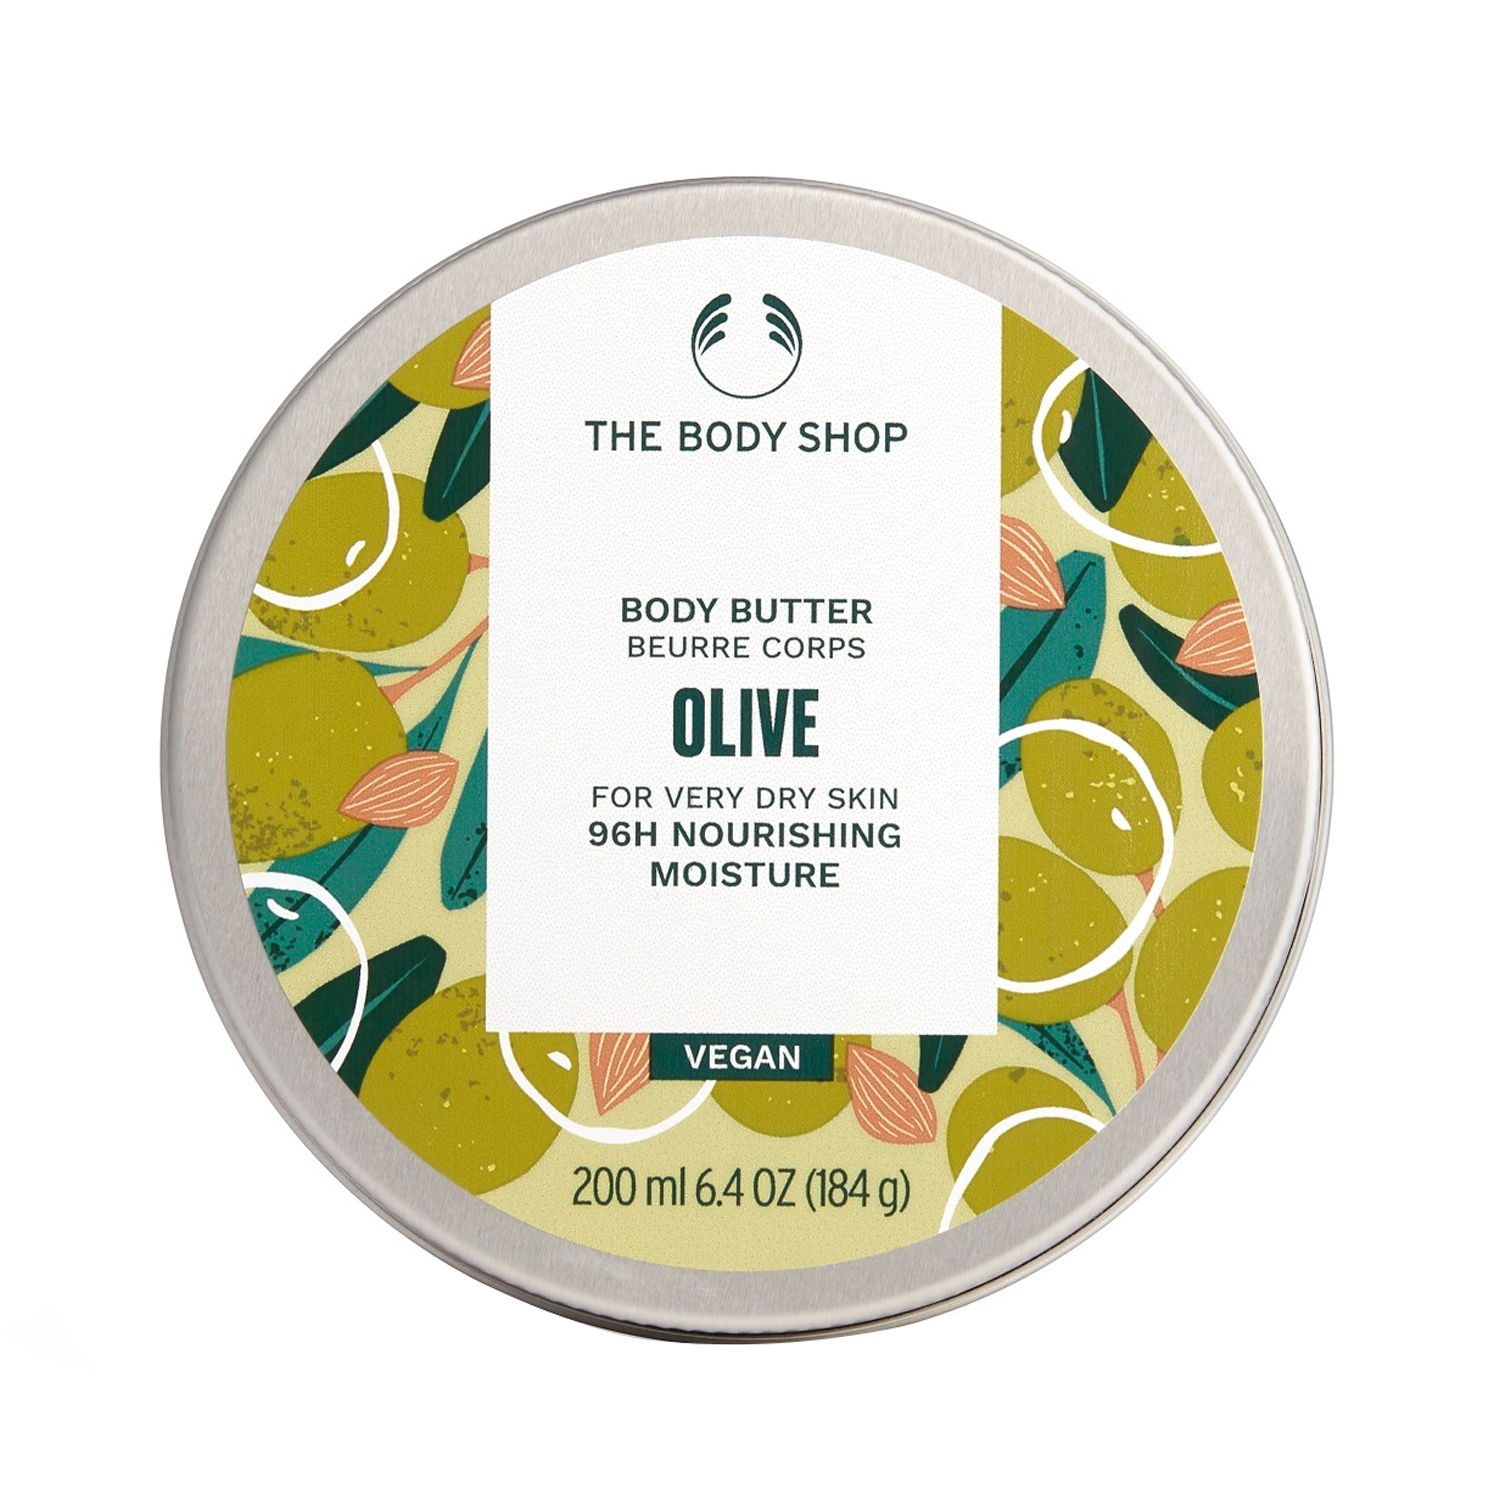 The Body Shop | The Body Shop Olive Body Butter (200ml)